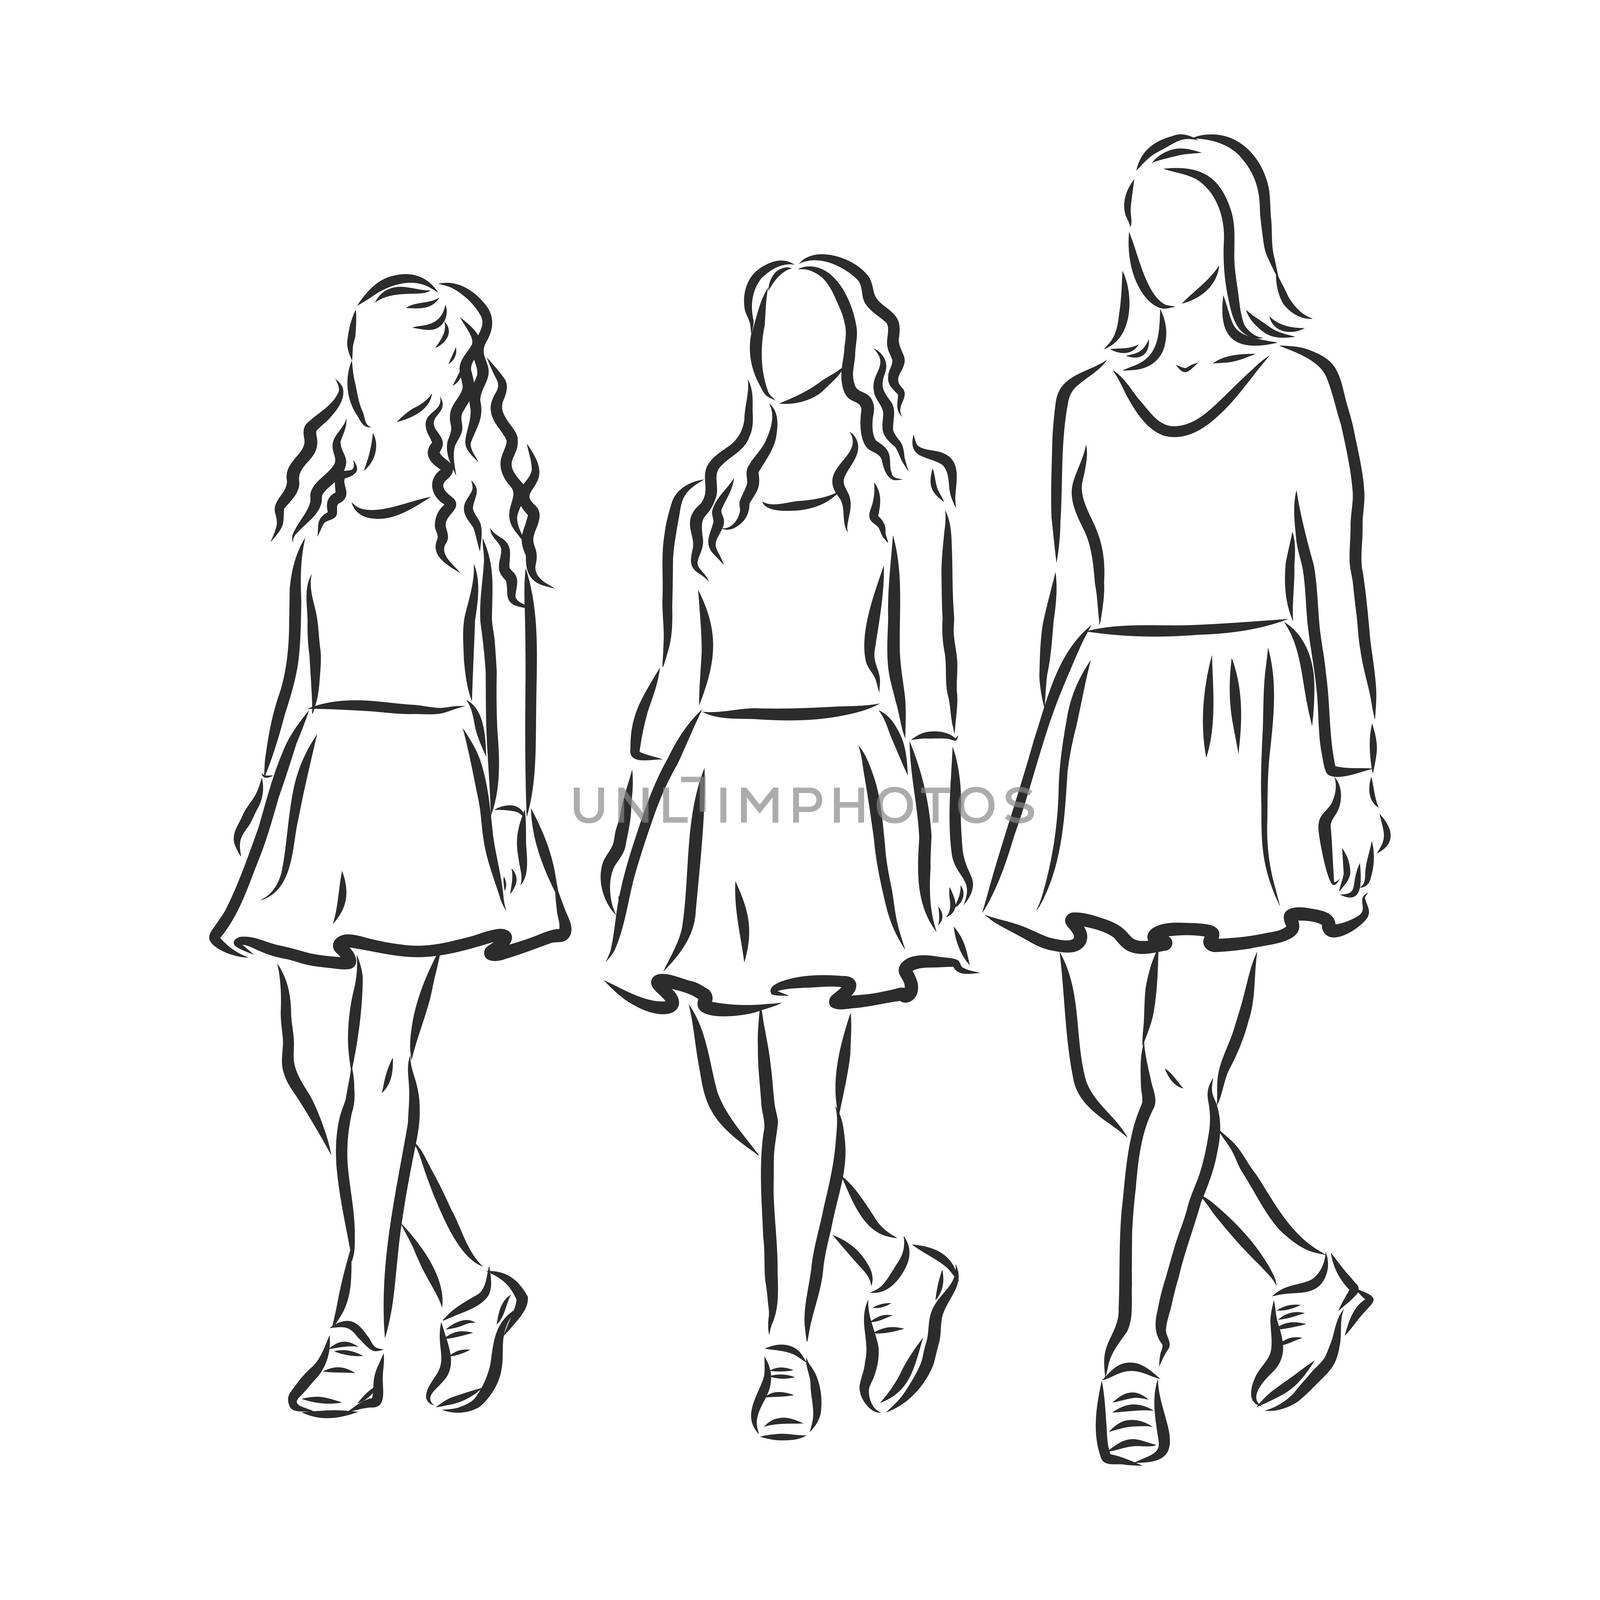 Irish Dance Troupe Jumping Together in Traditional Dresses and Ghillies. Irish dancing vector sketch illustration by ekaterina